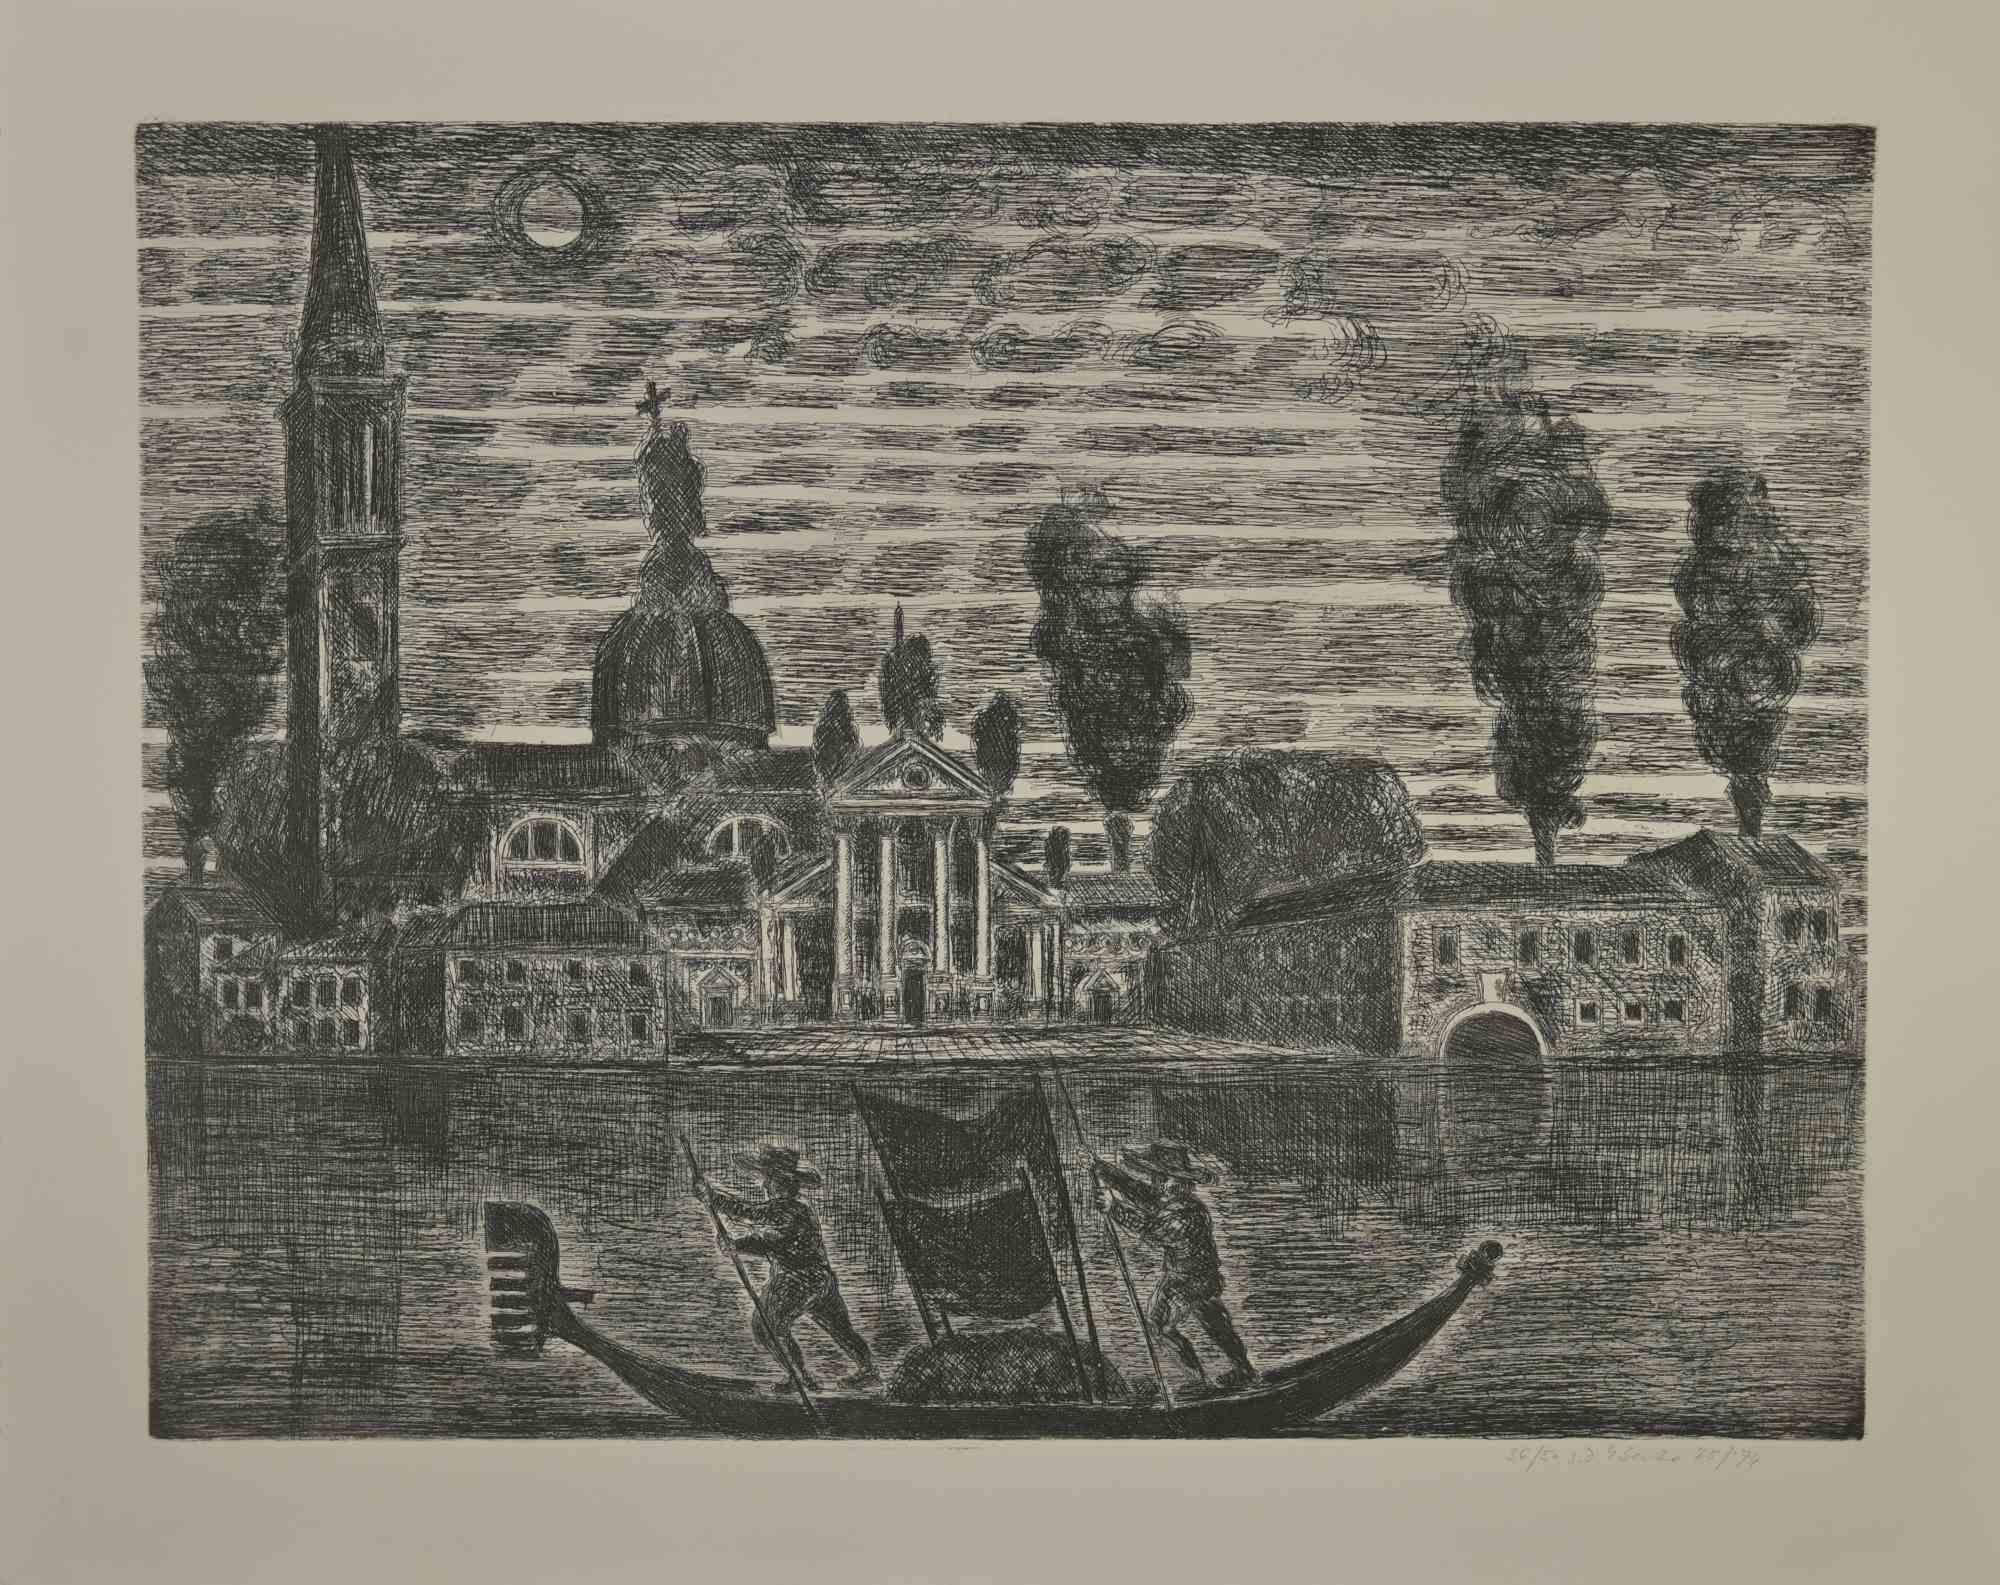 Gondoliers in Venice is an etching realized by Gianpaolo Berto in 1974.

60 X 75 cm , no frame.

Edition 36/50. Numbered and firmed by the artist in the lower margin.

Good conditions.

 

Gianpaolo Berto (1940) was born and raised in the